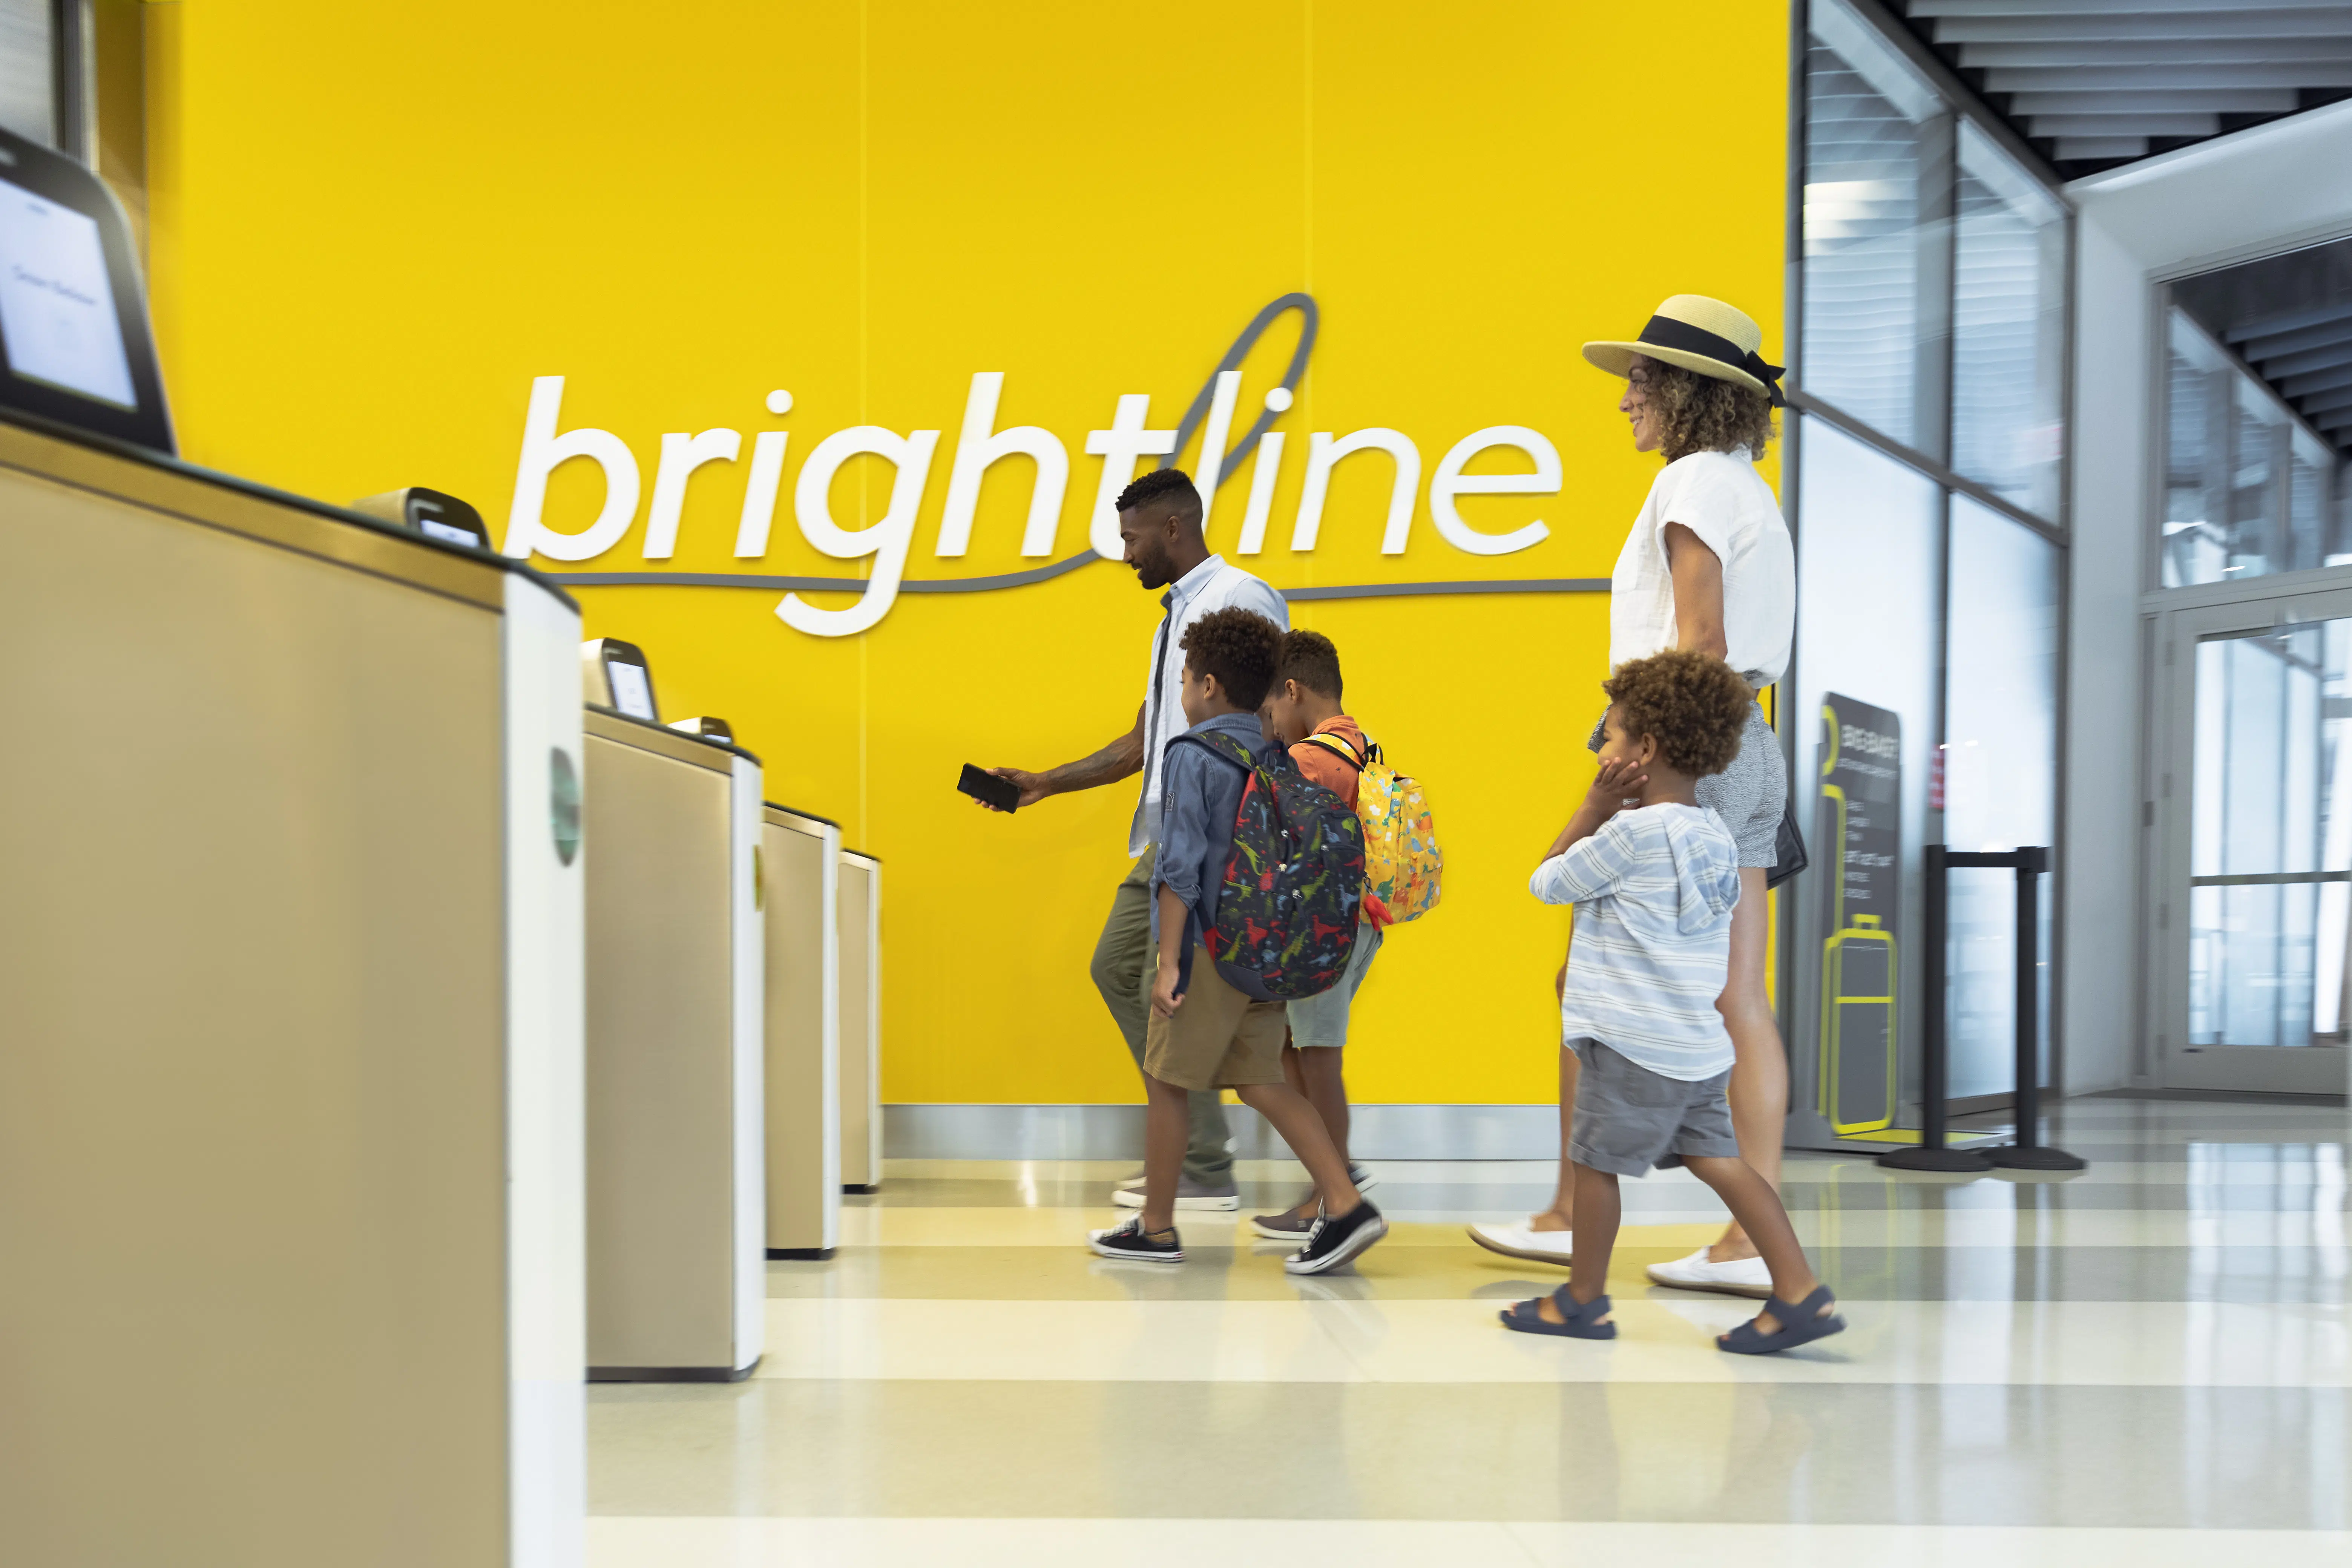 Brightline All-Station Shared Pass